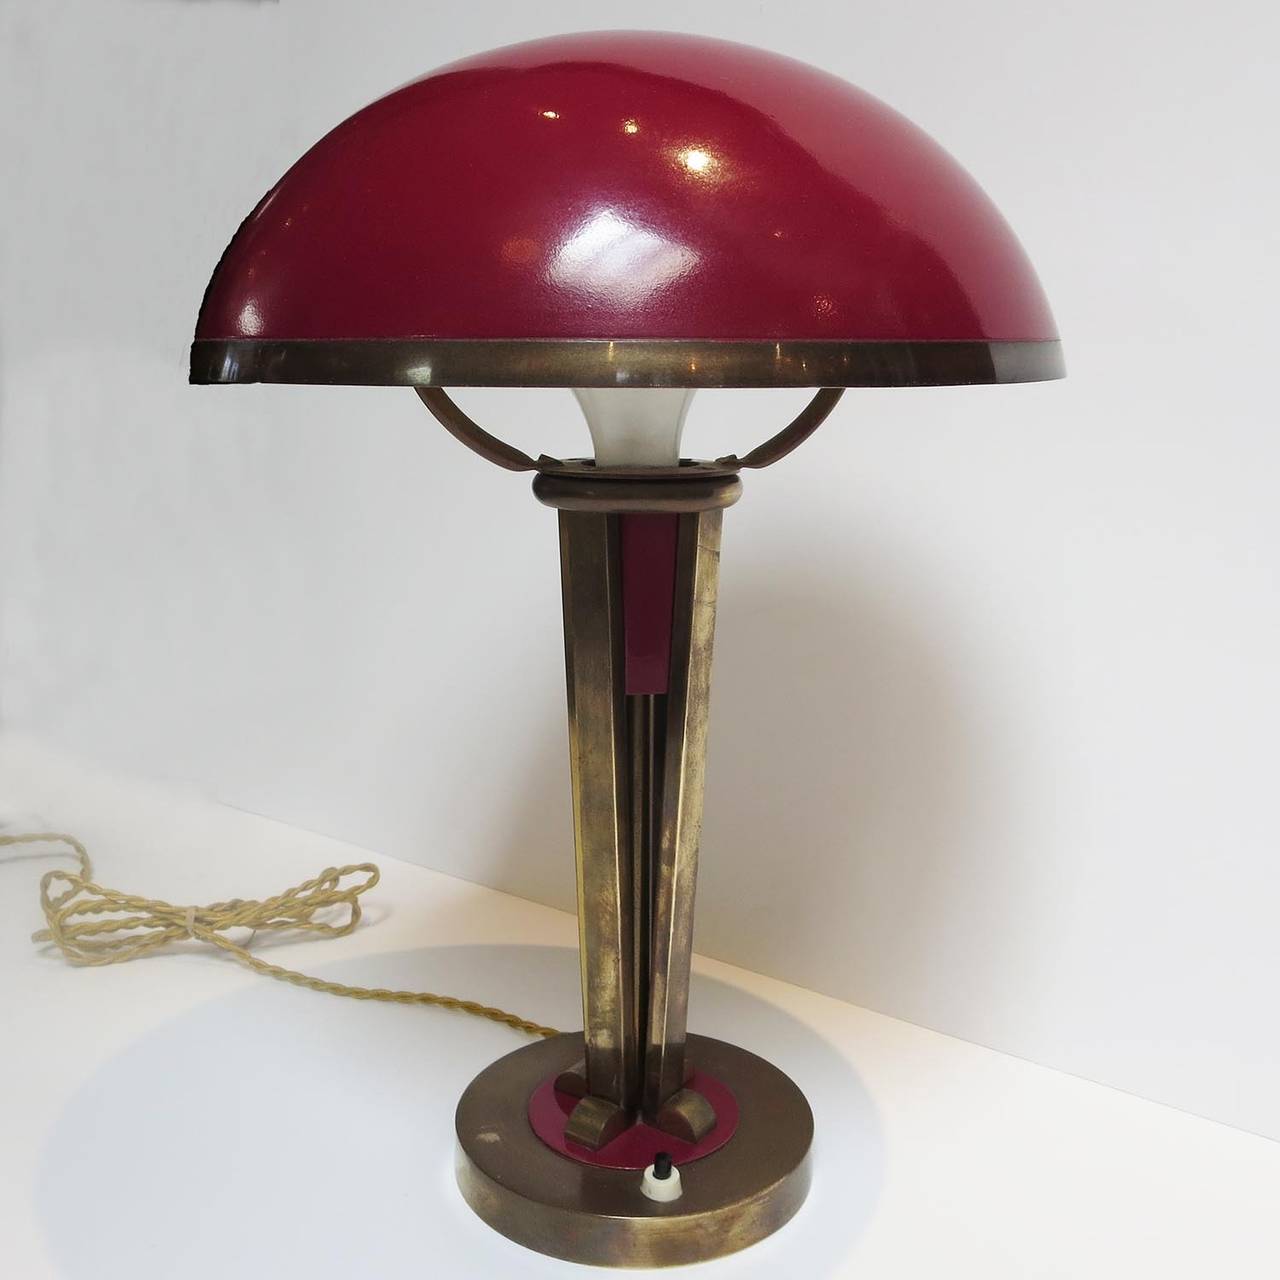 Although the designer of this great lamp has yet to be determined, the work reflects the designs of Desny and Adnet. All surfaces are original brass and enamel. The inside of the shade has been repainted in an original white color. The lamp works